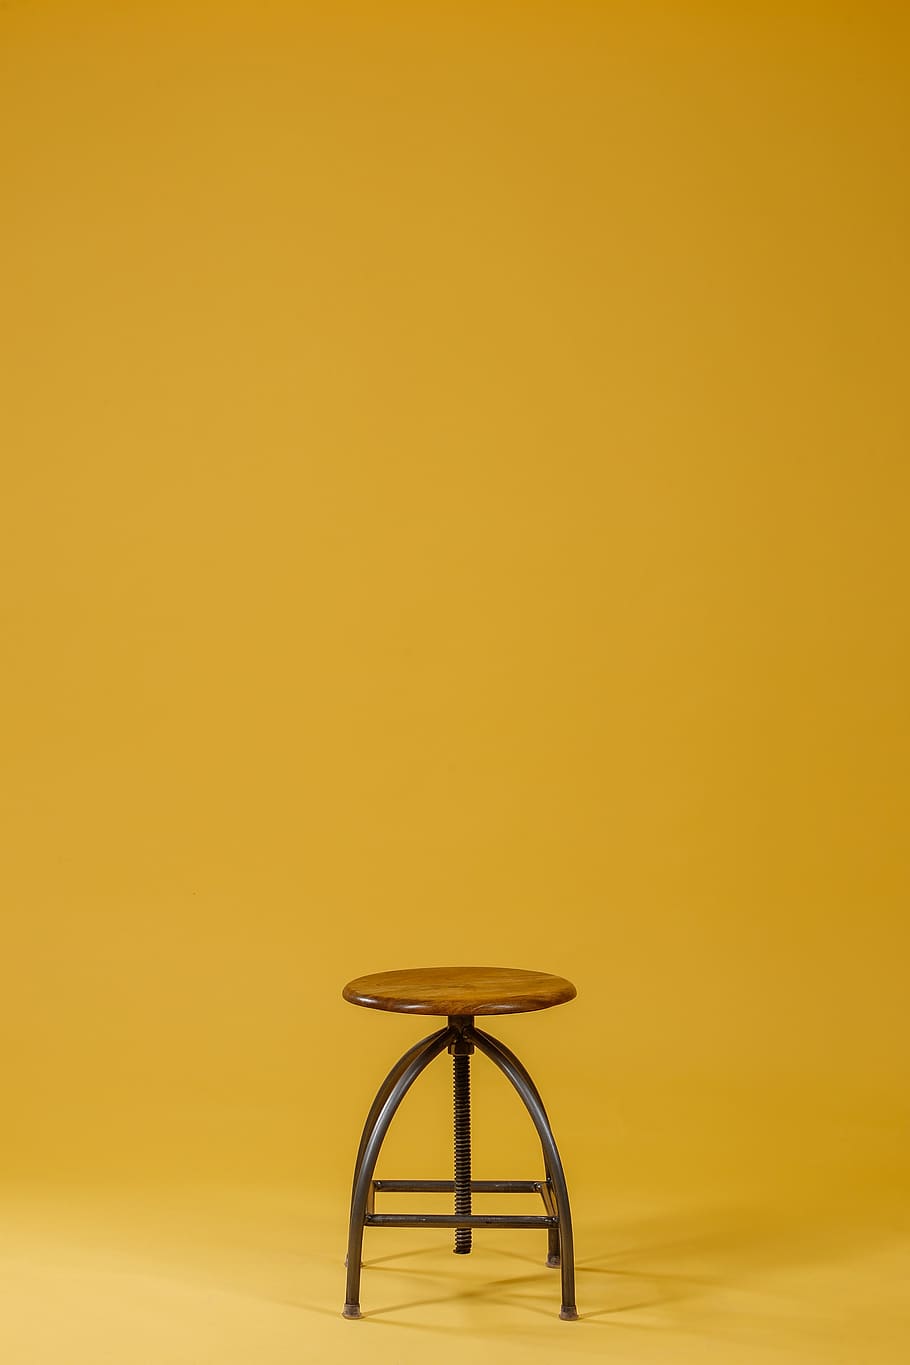 HD wallpaper: round brown wooden top and black base chair on yellow  background | Wallpaper Flare